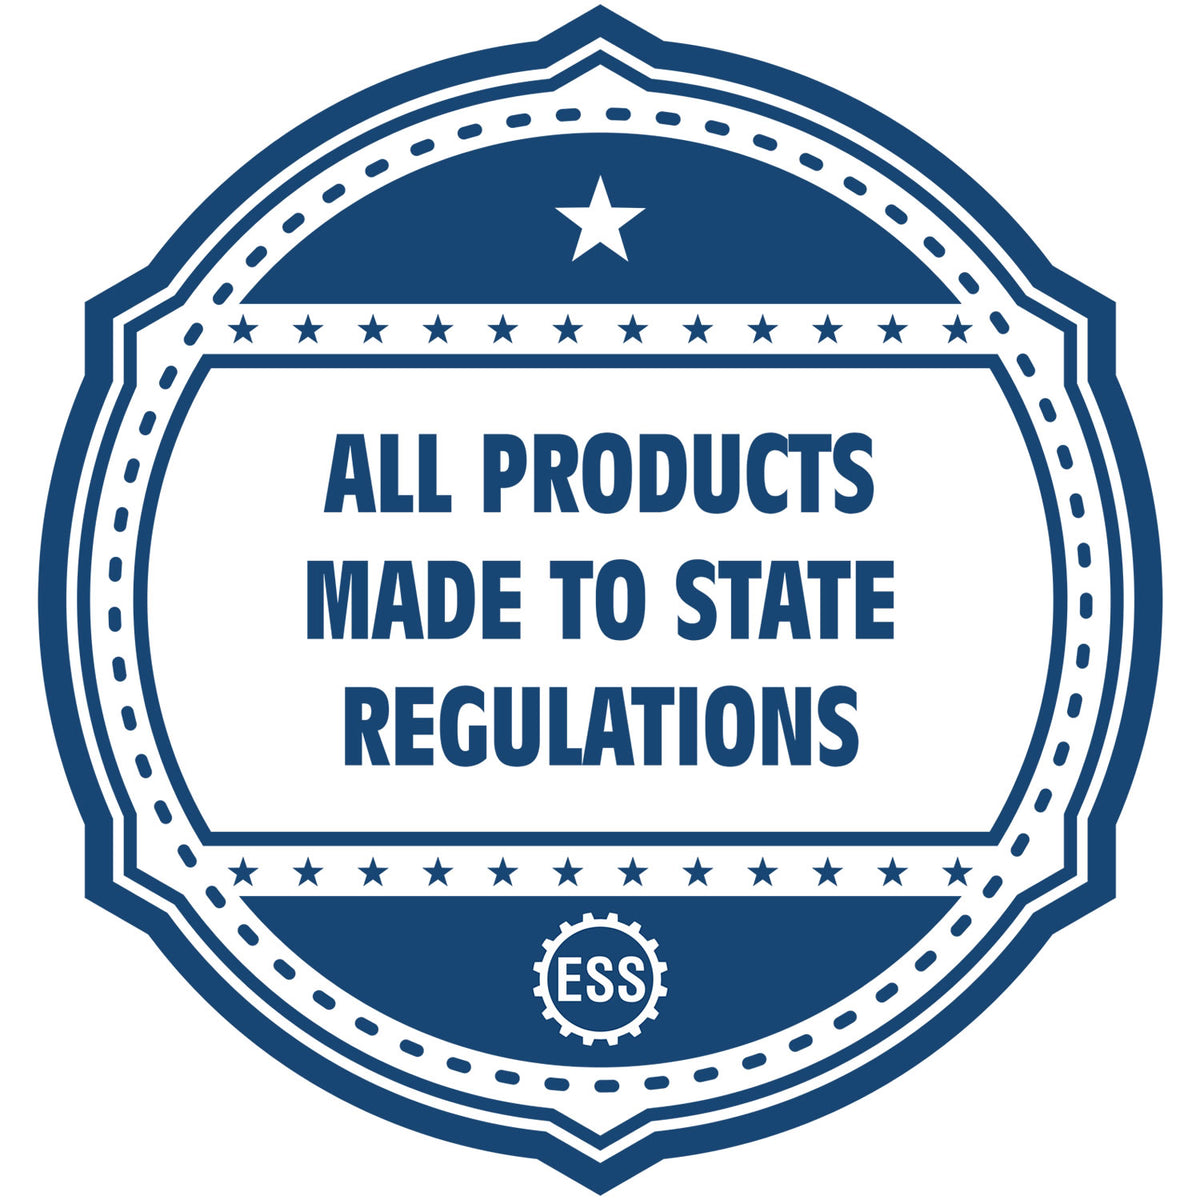 An icon or badge element for the Digital Idaho PE Stamp and Electronic Seal for Idaho Engineer showing that this product is made in compliance with state regulations.